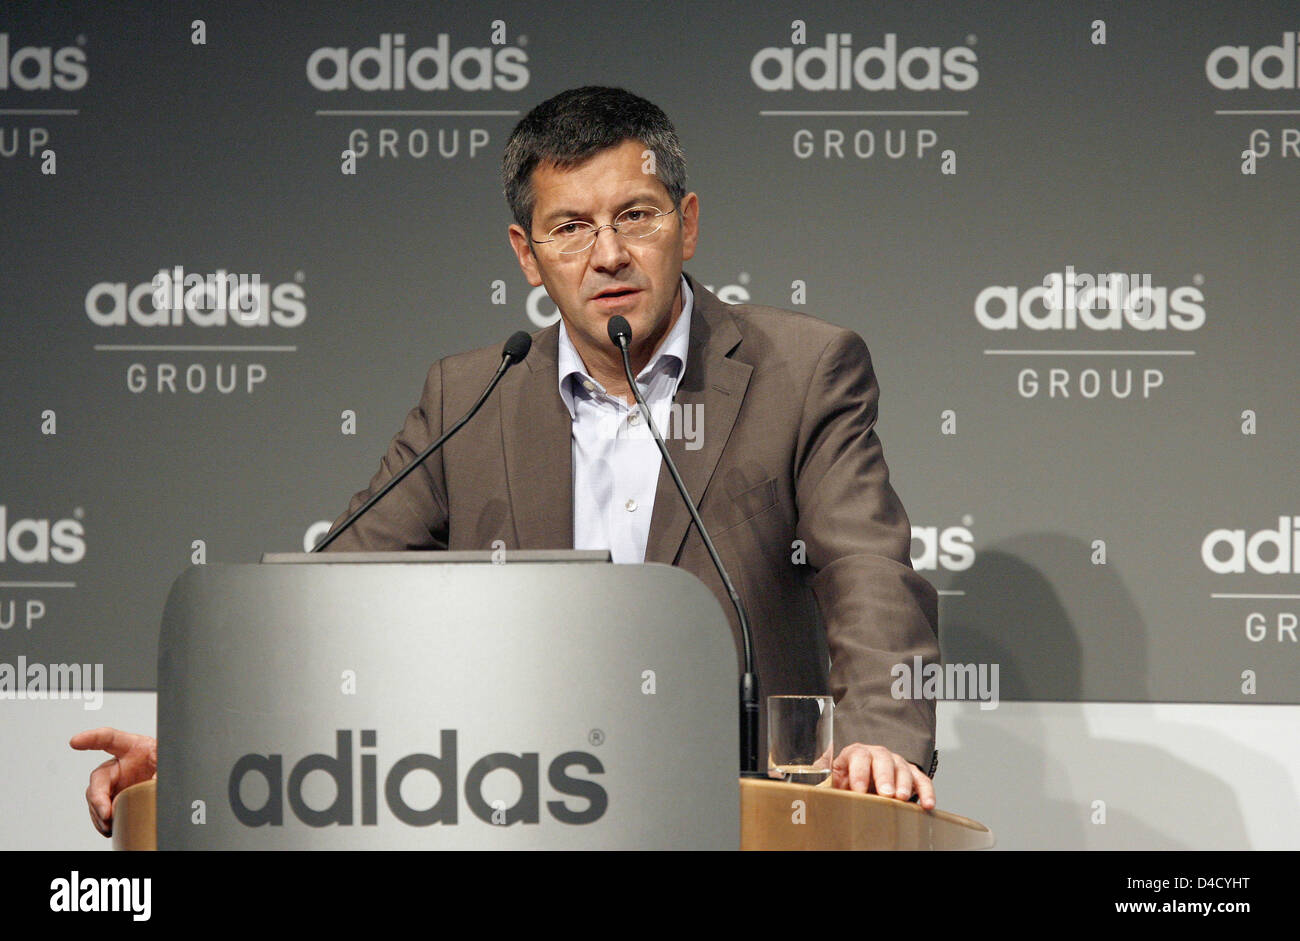 adidas CEO Herbert Hainer speaks during a balance press conference at the company's headquarters in Herzogenaurach, Germany, 05 March 2008. For the seventh consecutive time adidas managed to increase its profit by a two-digit figure. In 2007 profits of adidas rose by 14.2 per cent to 551 million euro. Photo: DANIEL KARMANN Stock Photo